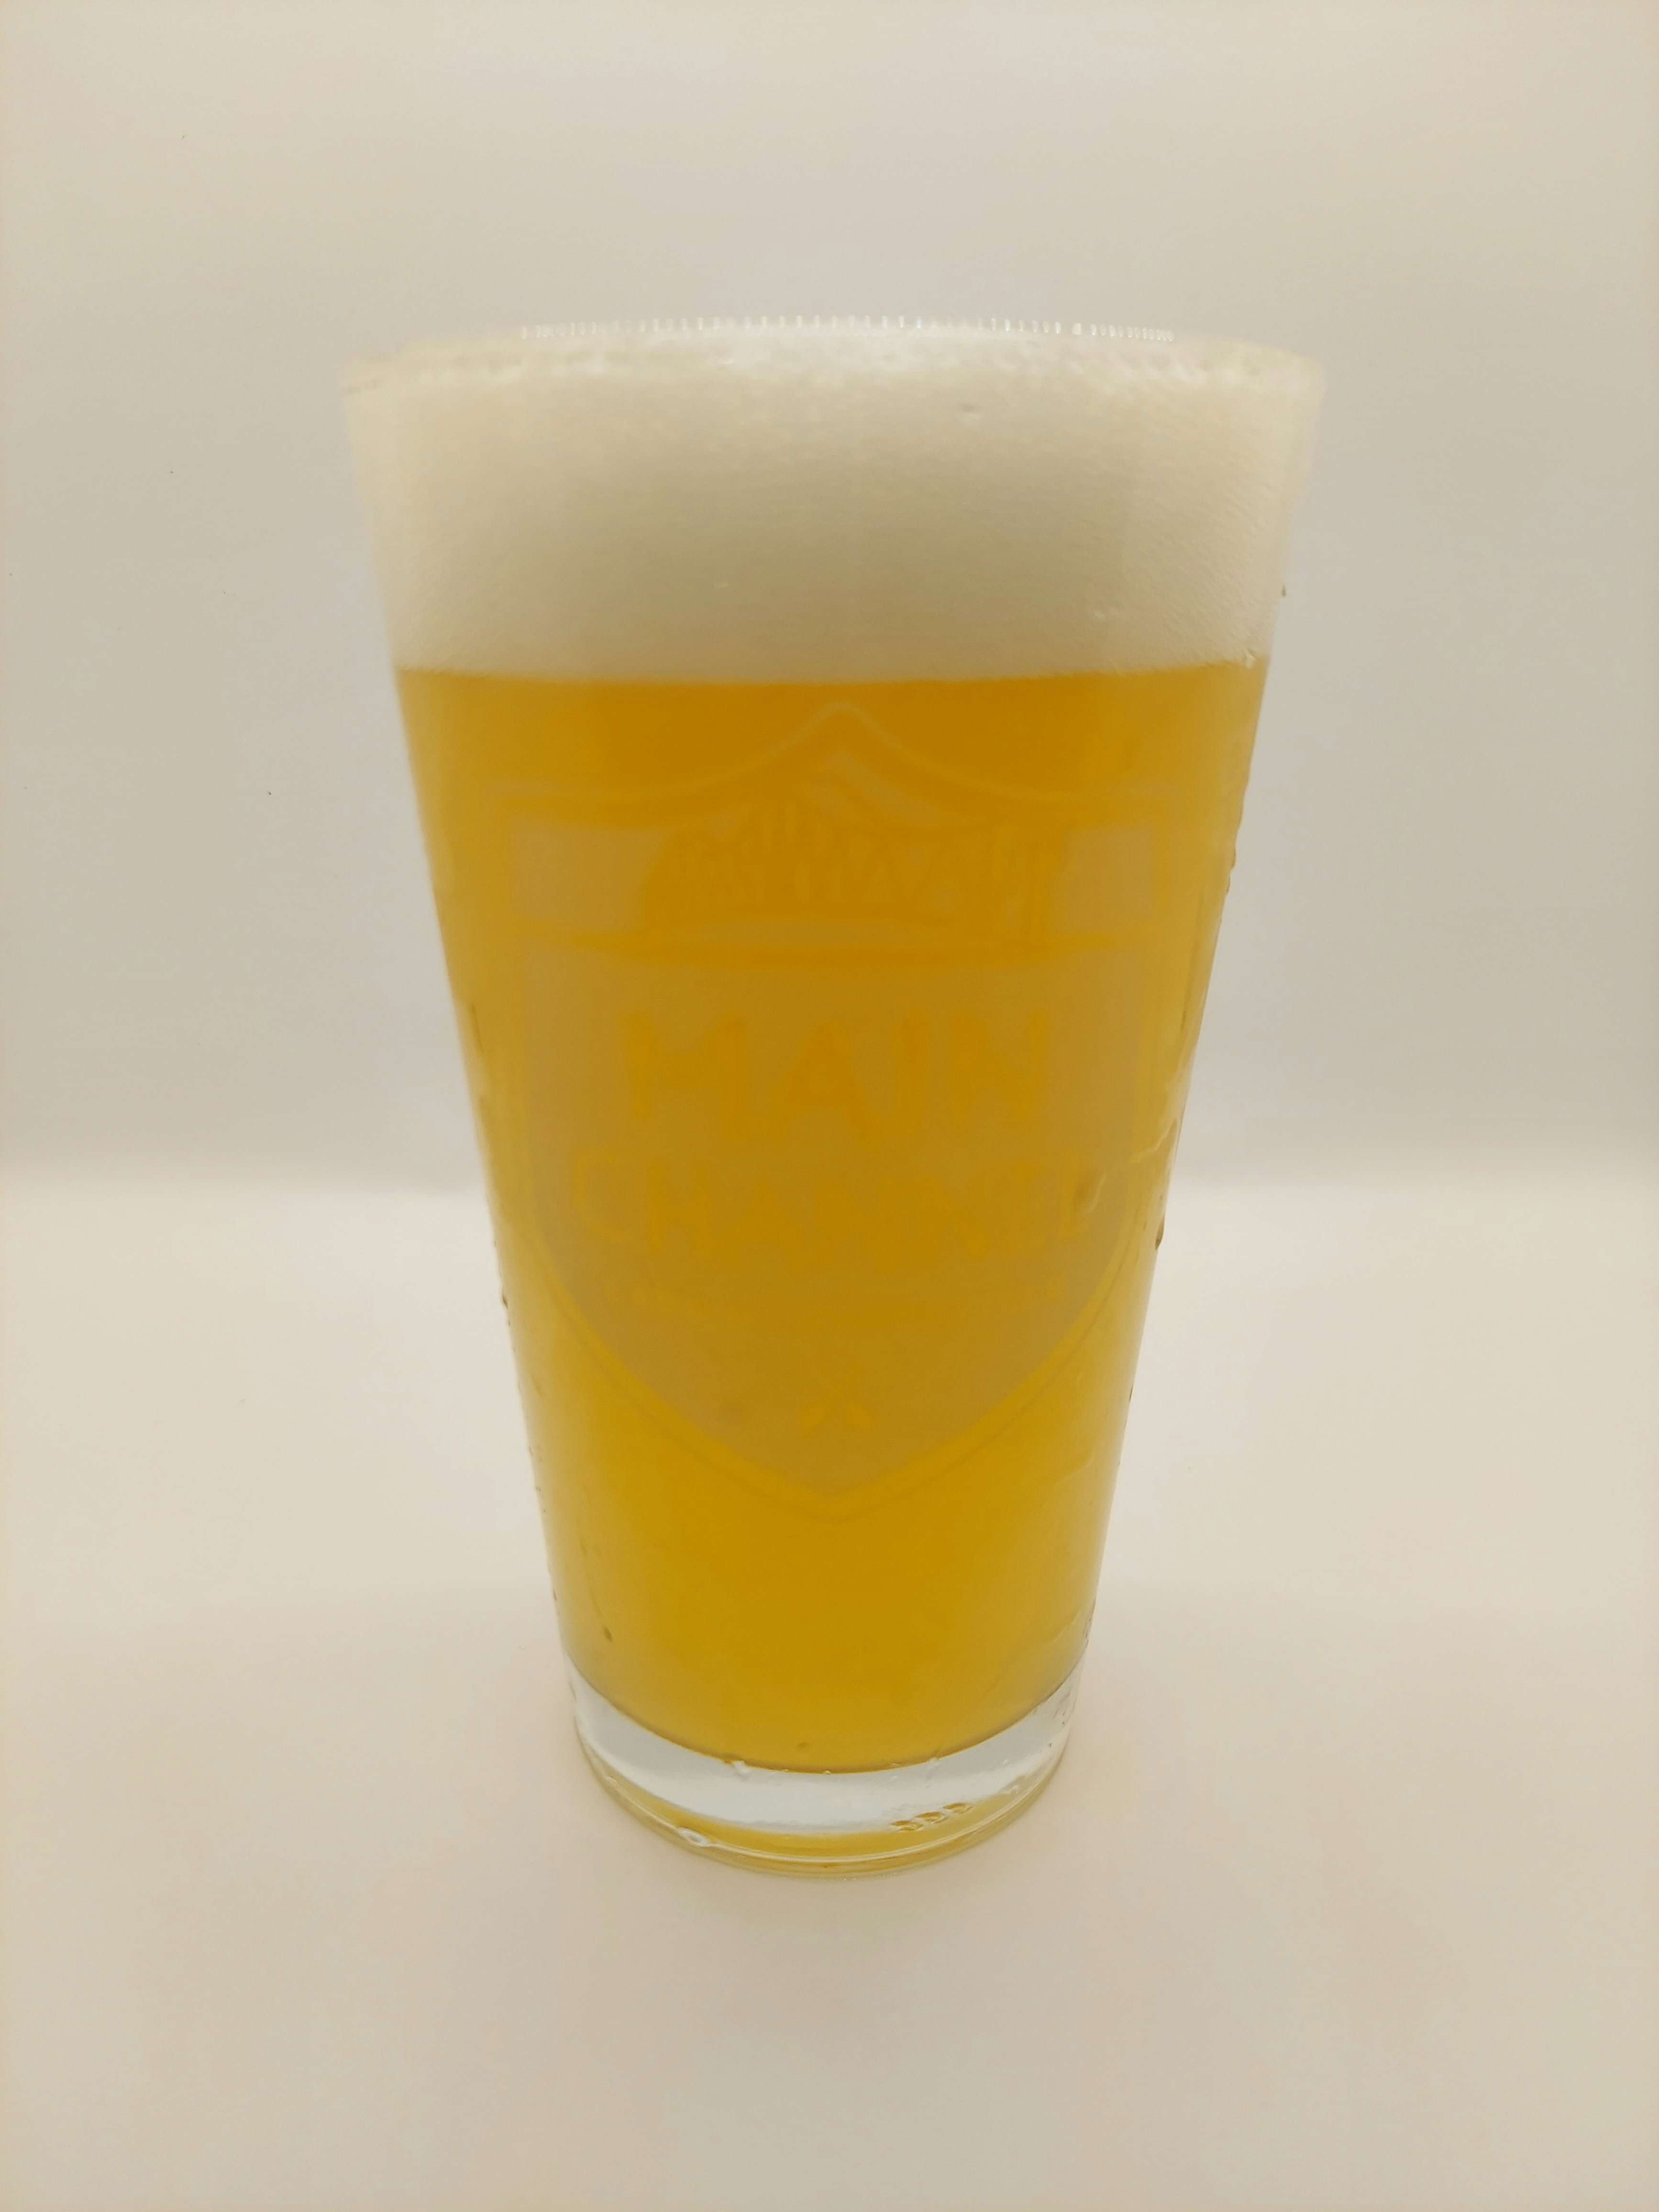 DDH (Double Dry Hopped) IPA